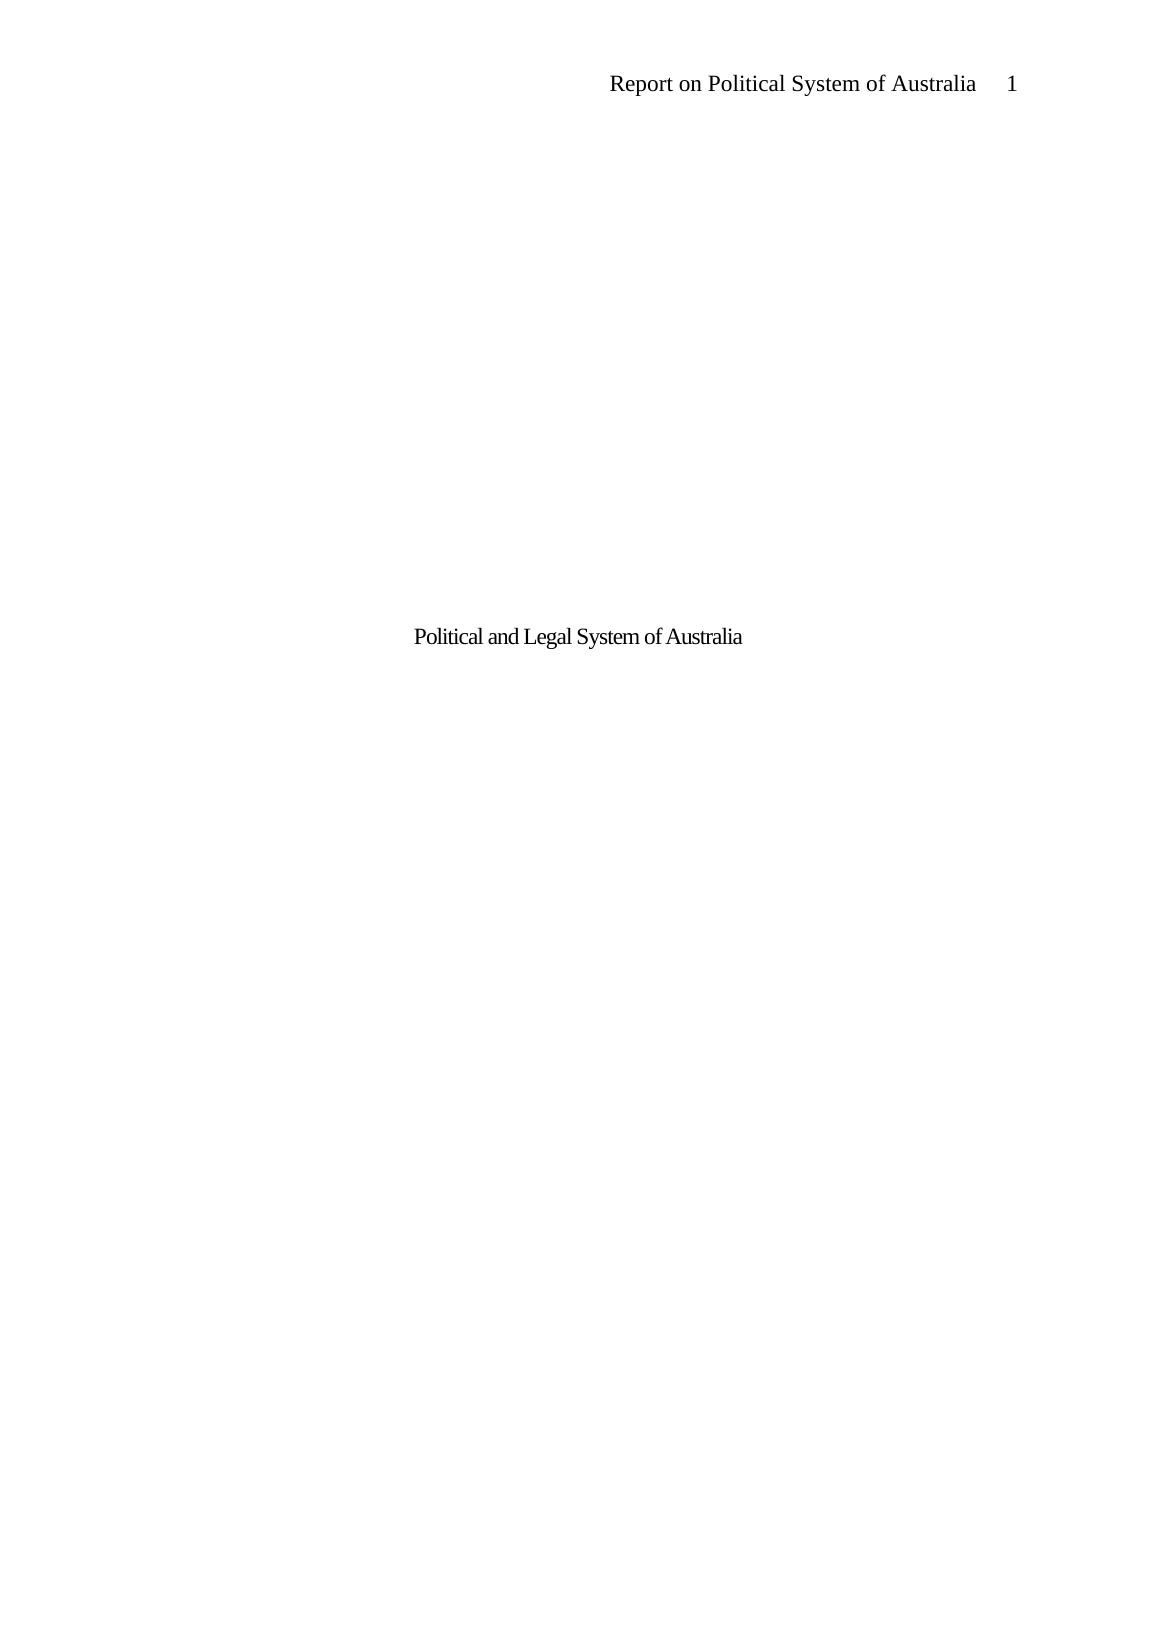 Report On Political System Of Australia_1